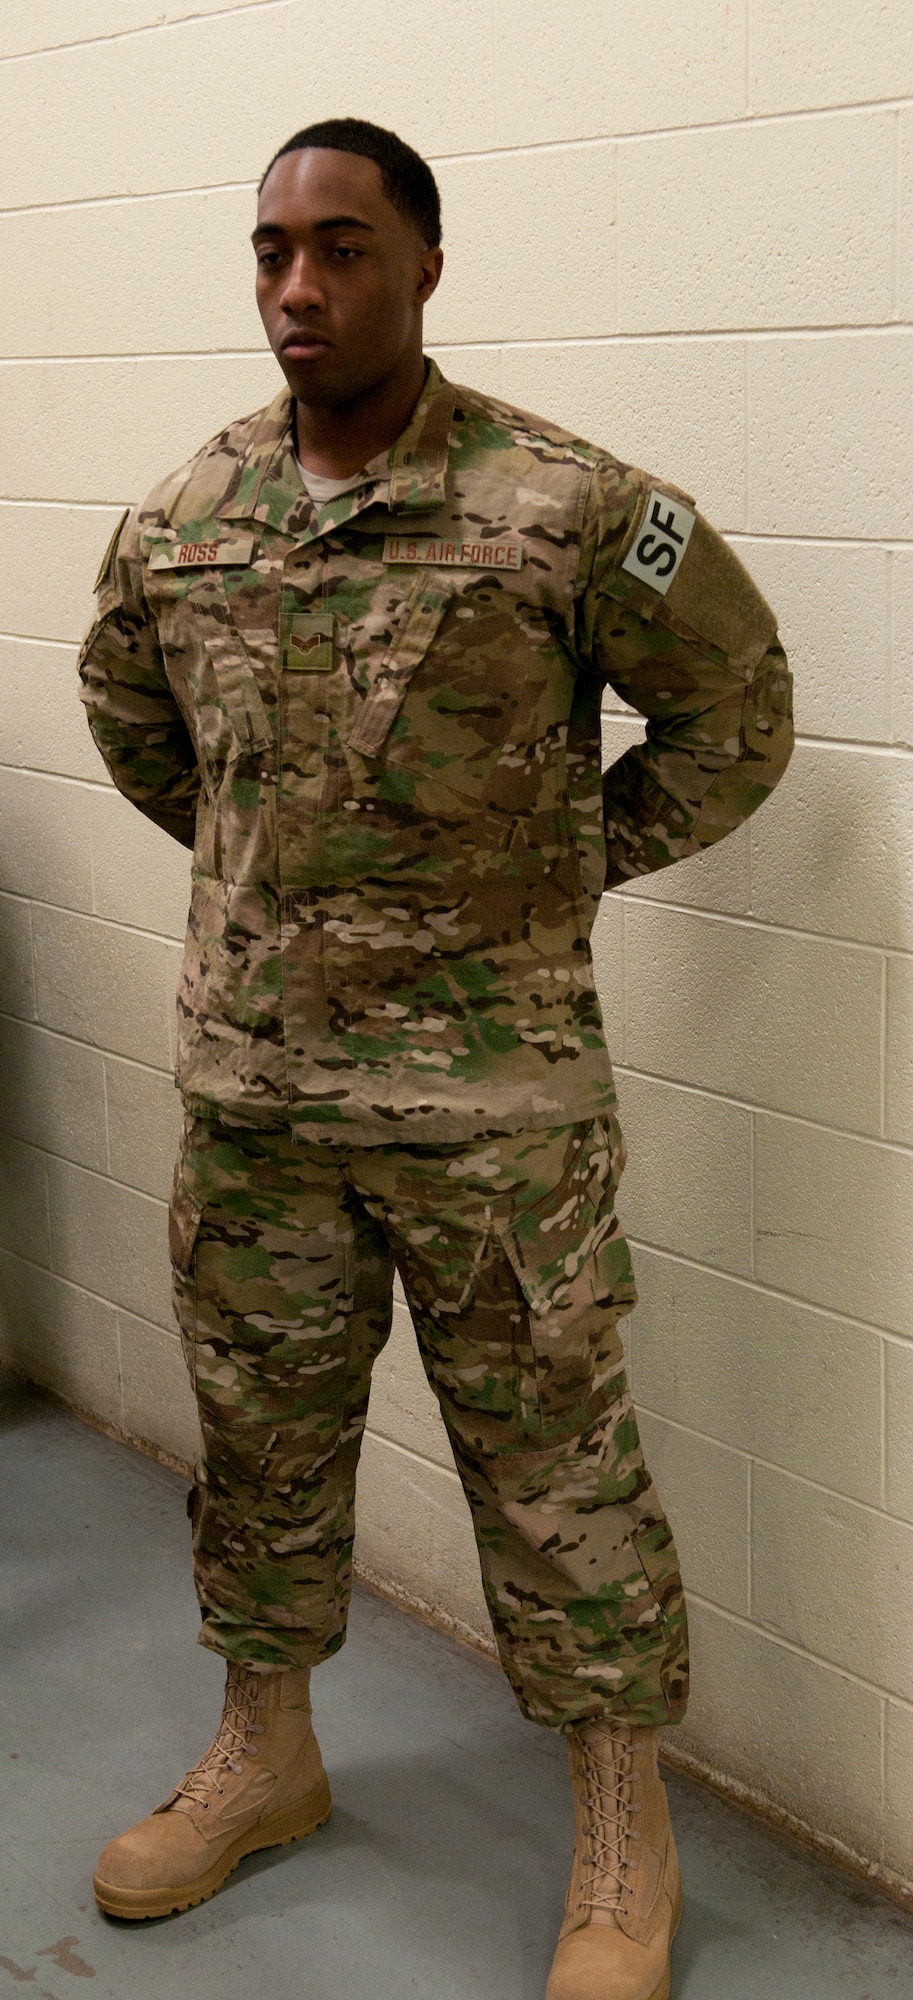 Senior Airman Demetris Ross, 790th Missile Security Forces Squadron Security Support Team, models the new Operation Enduring Freedom Camouflage Pattern uniform Feb. 2, 2015, in the Peacekeeper High Bay on F.E. Warren Air Force Base, Wyo. Defenders across the 20th Air Force who travel out and protect the missile fields will receive the new uniforms as part of the Air Force Global Strike Command Model Defender Program. (U.S. Air Force photo by Airman 1st Class Brandon Valle)